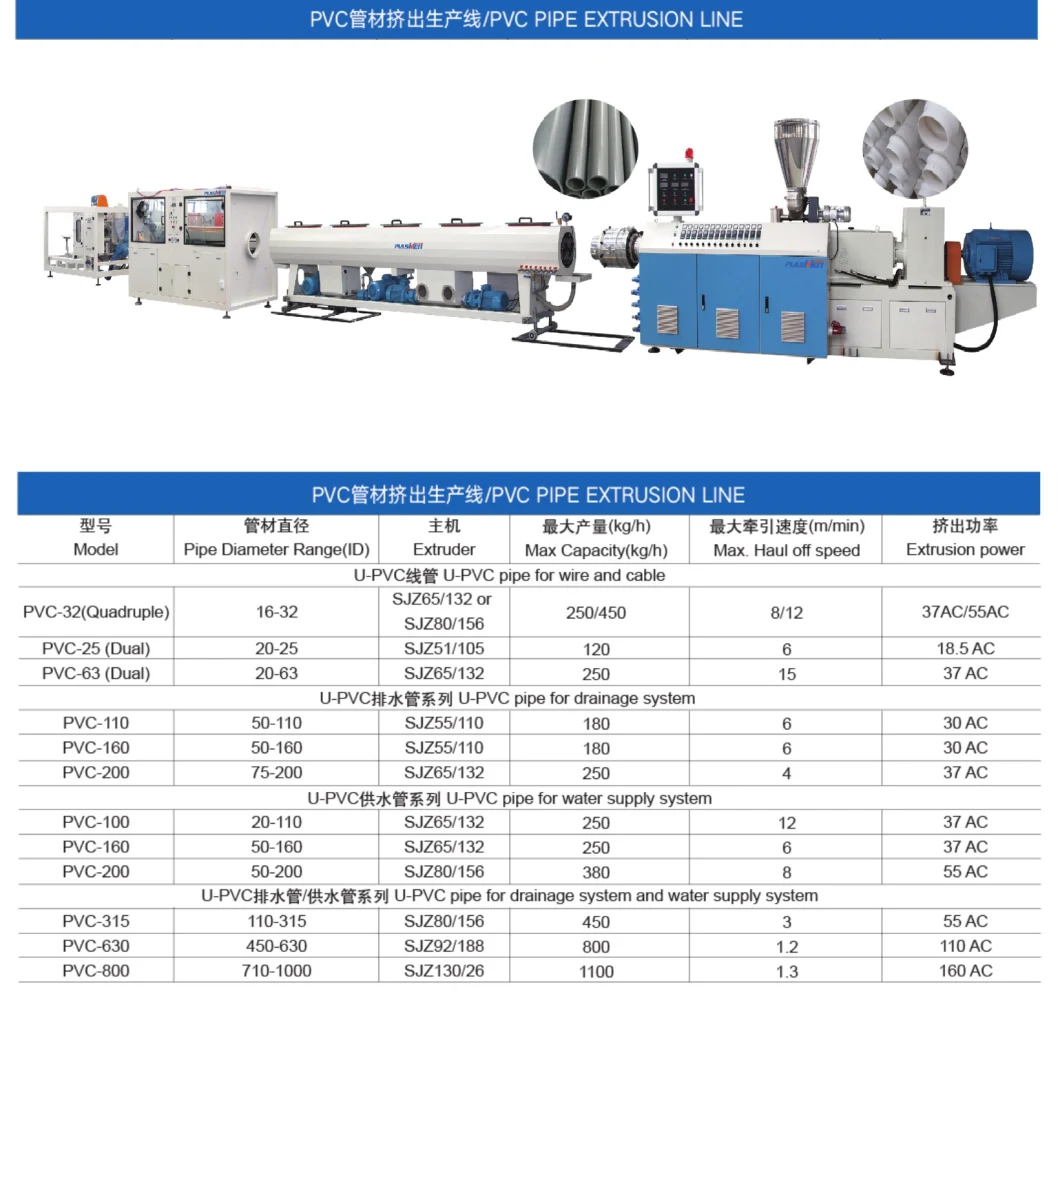 PVC Pipe Extruder/Plastic Pipe Tube Making Machine/PVC Pipe Tube Extrudion Line/ PVC Plastic Pipe Extruder Machine for Water Pipe